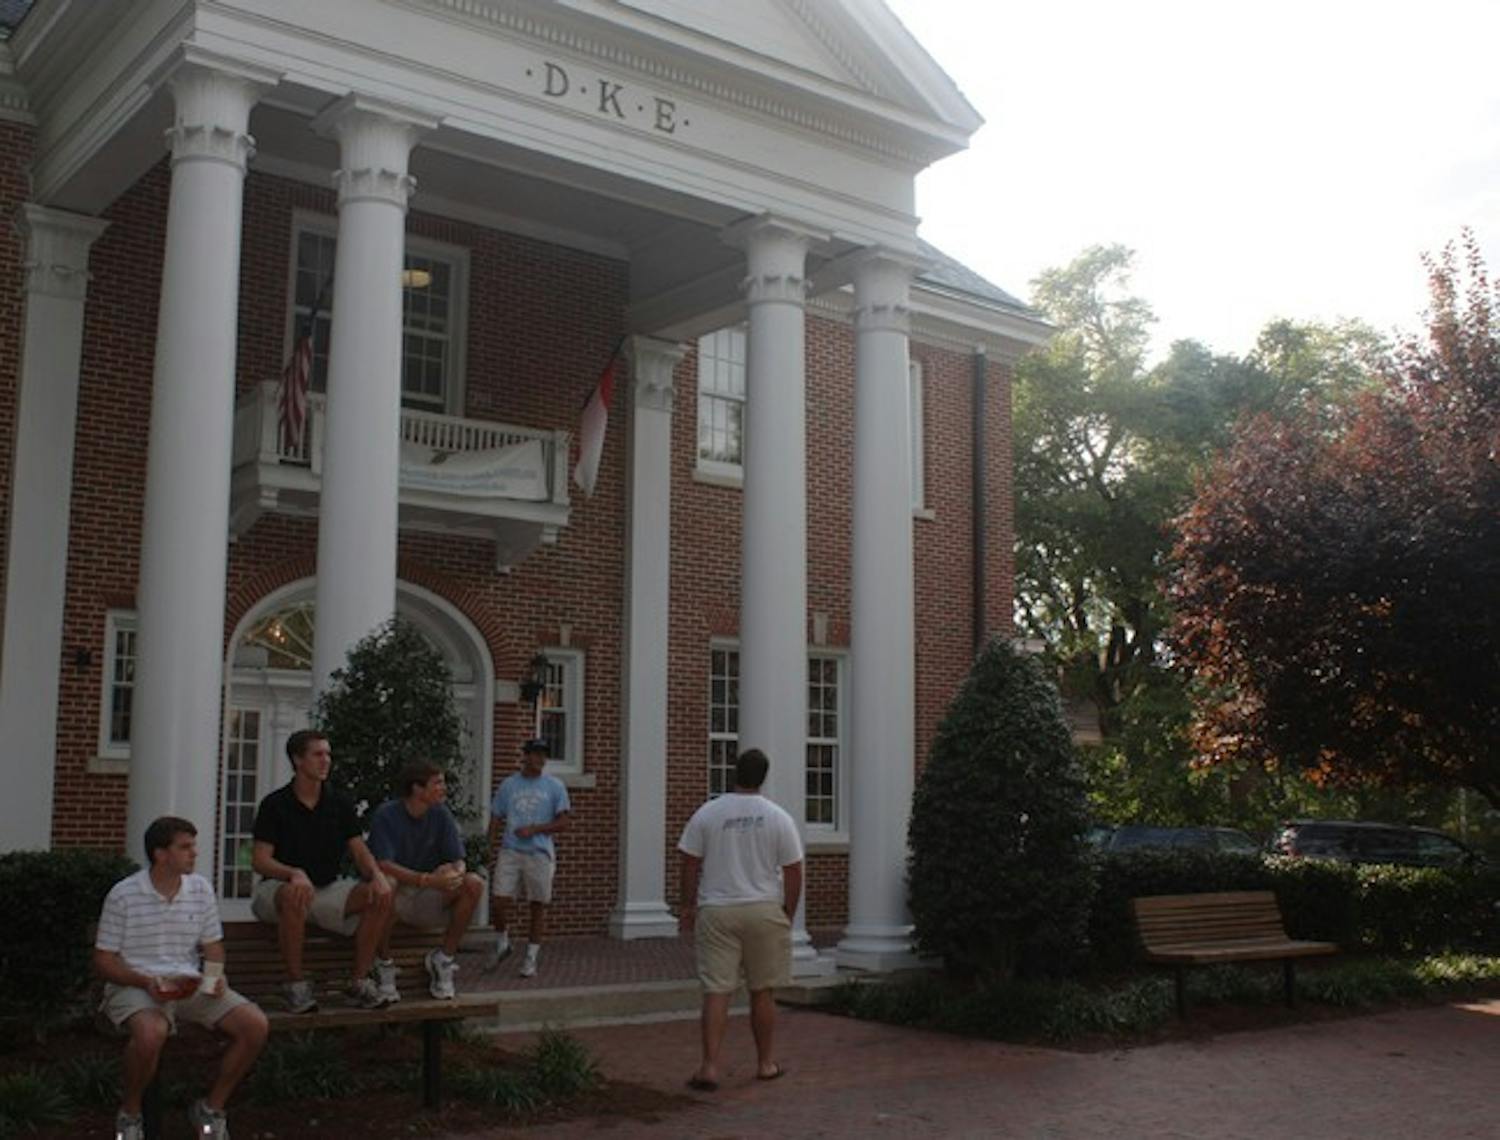 Since the death of Delta Kappa Epsilon president, Courtland Smith, a year ago, the UNC greek system has undergone reform to improve its image.
